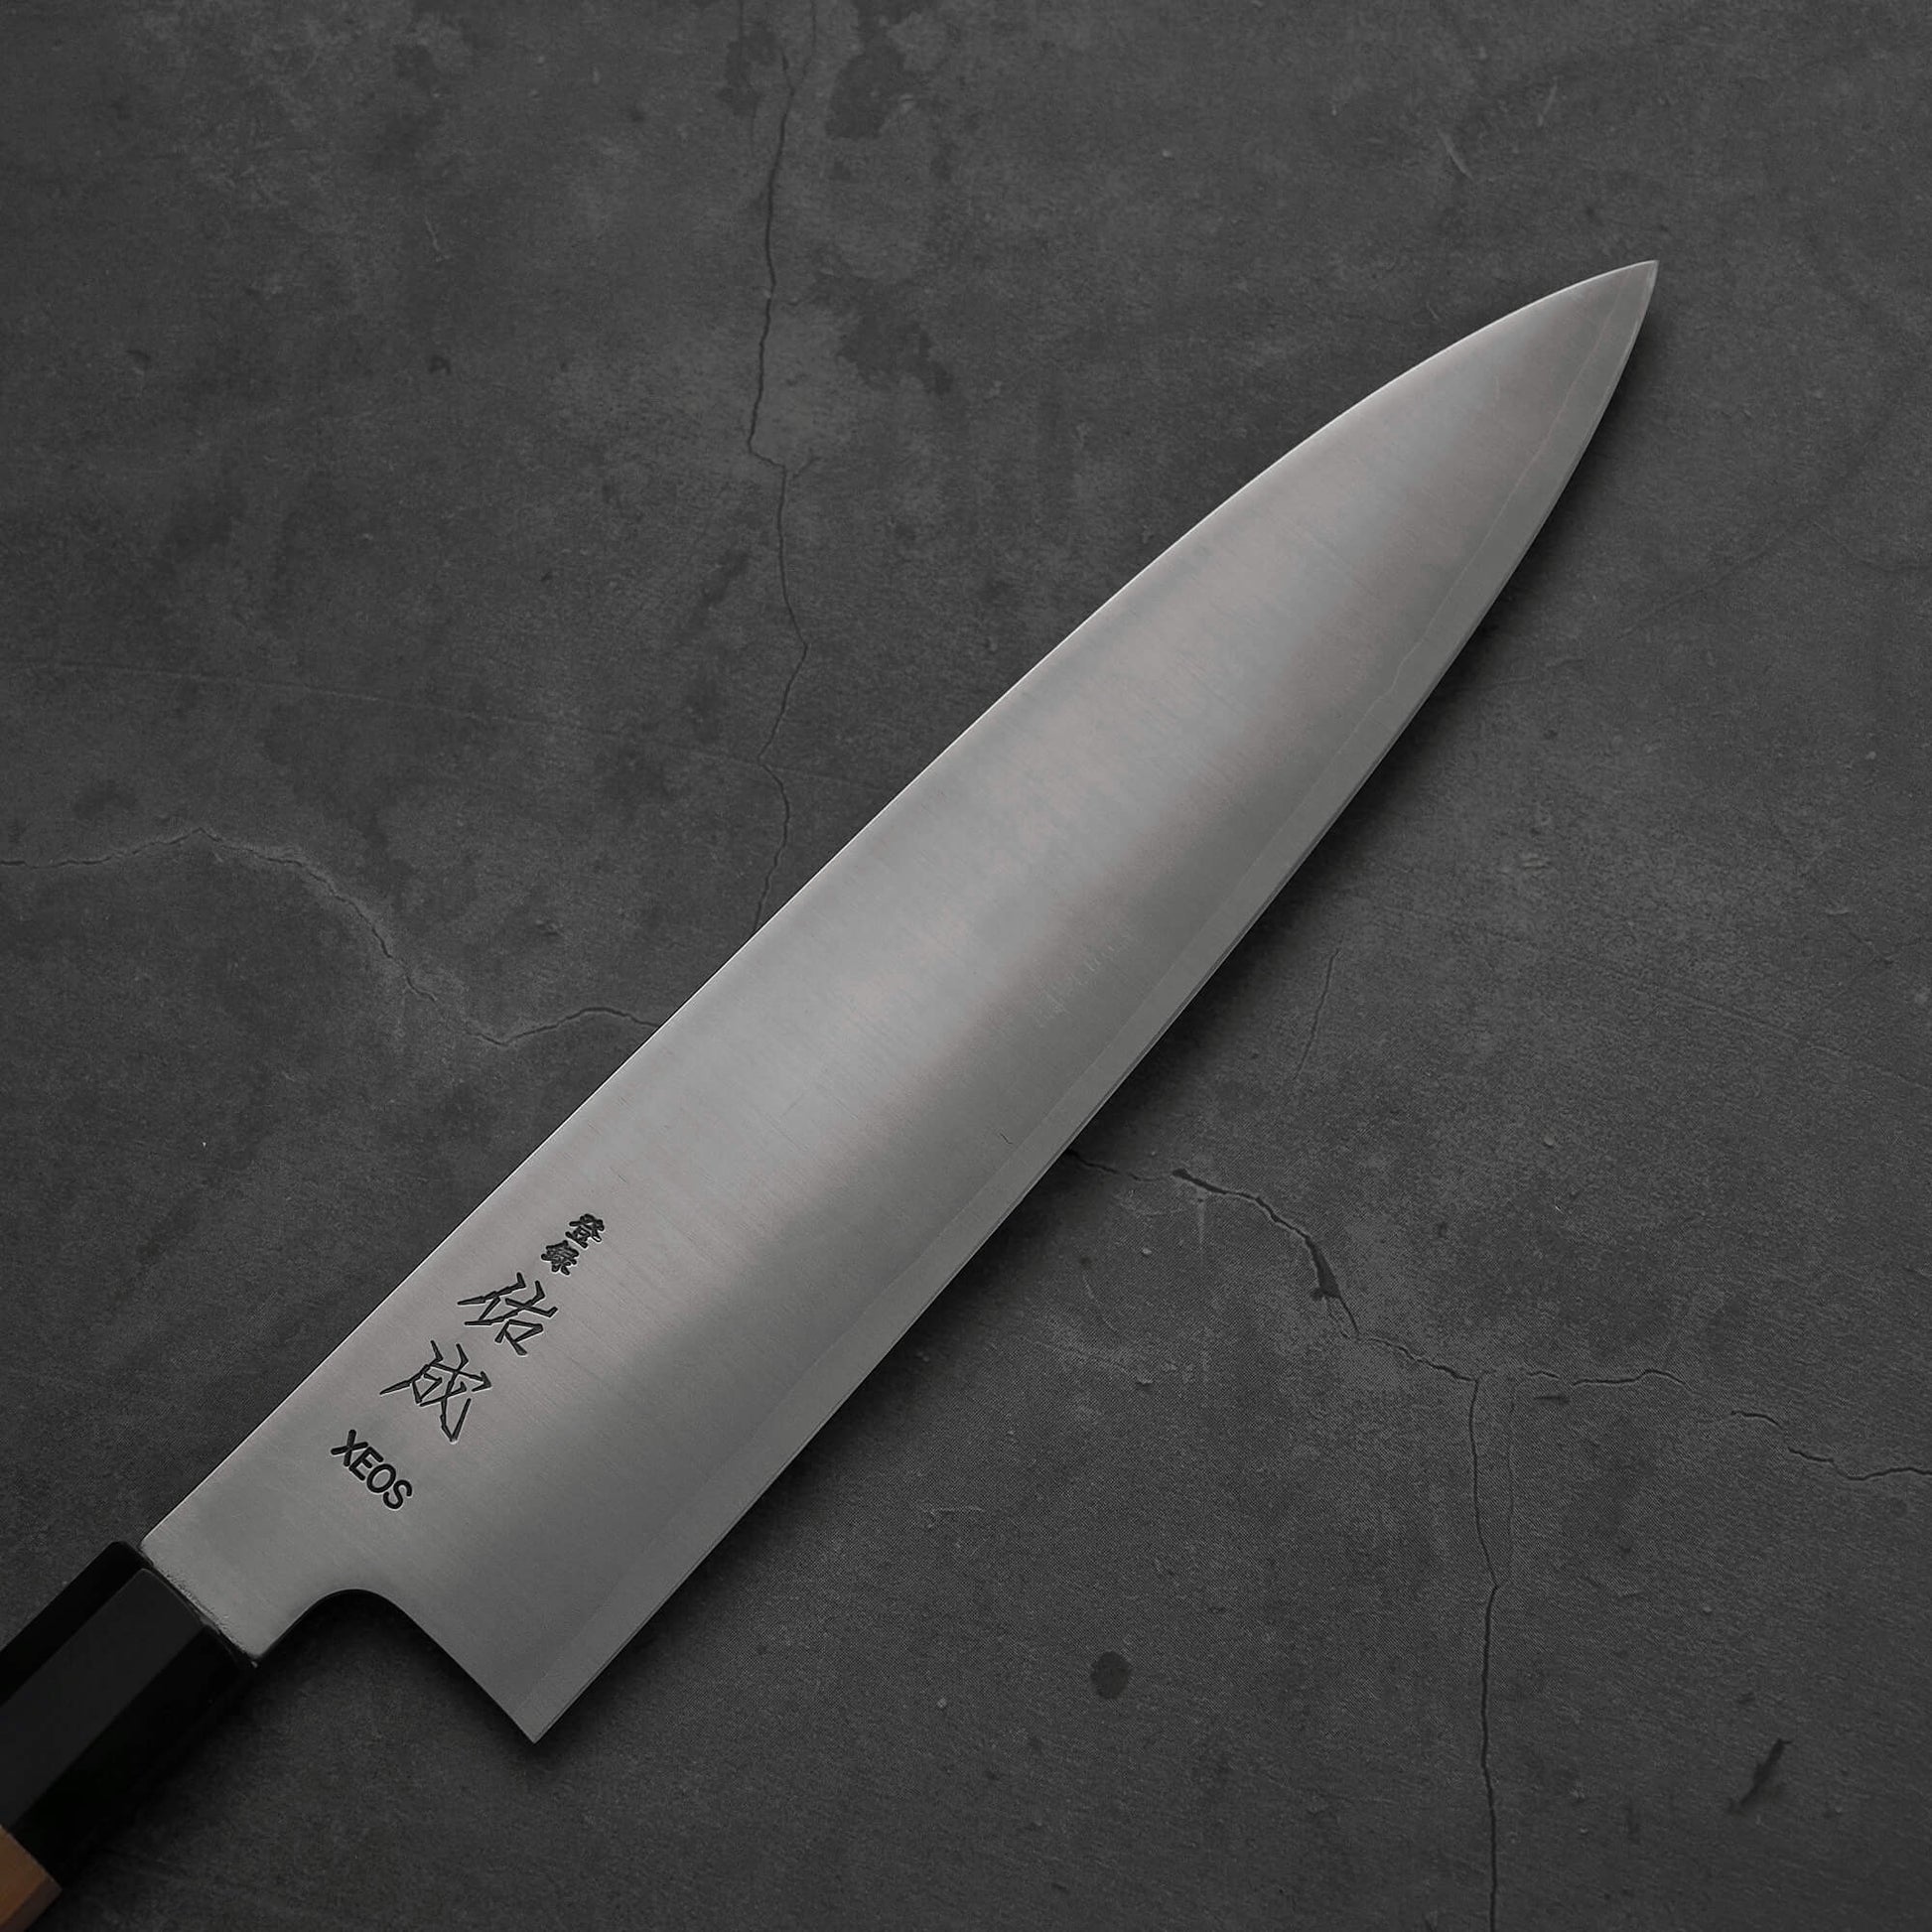 Top view of the blade of Sukenari XEOS gyuto 240mm. Image focuses on the right side